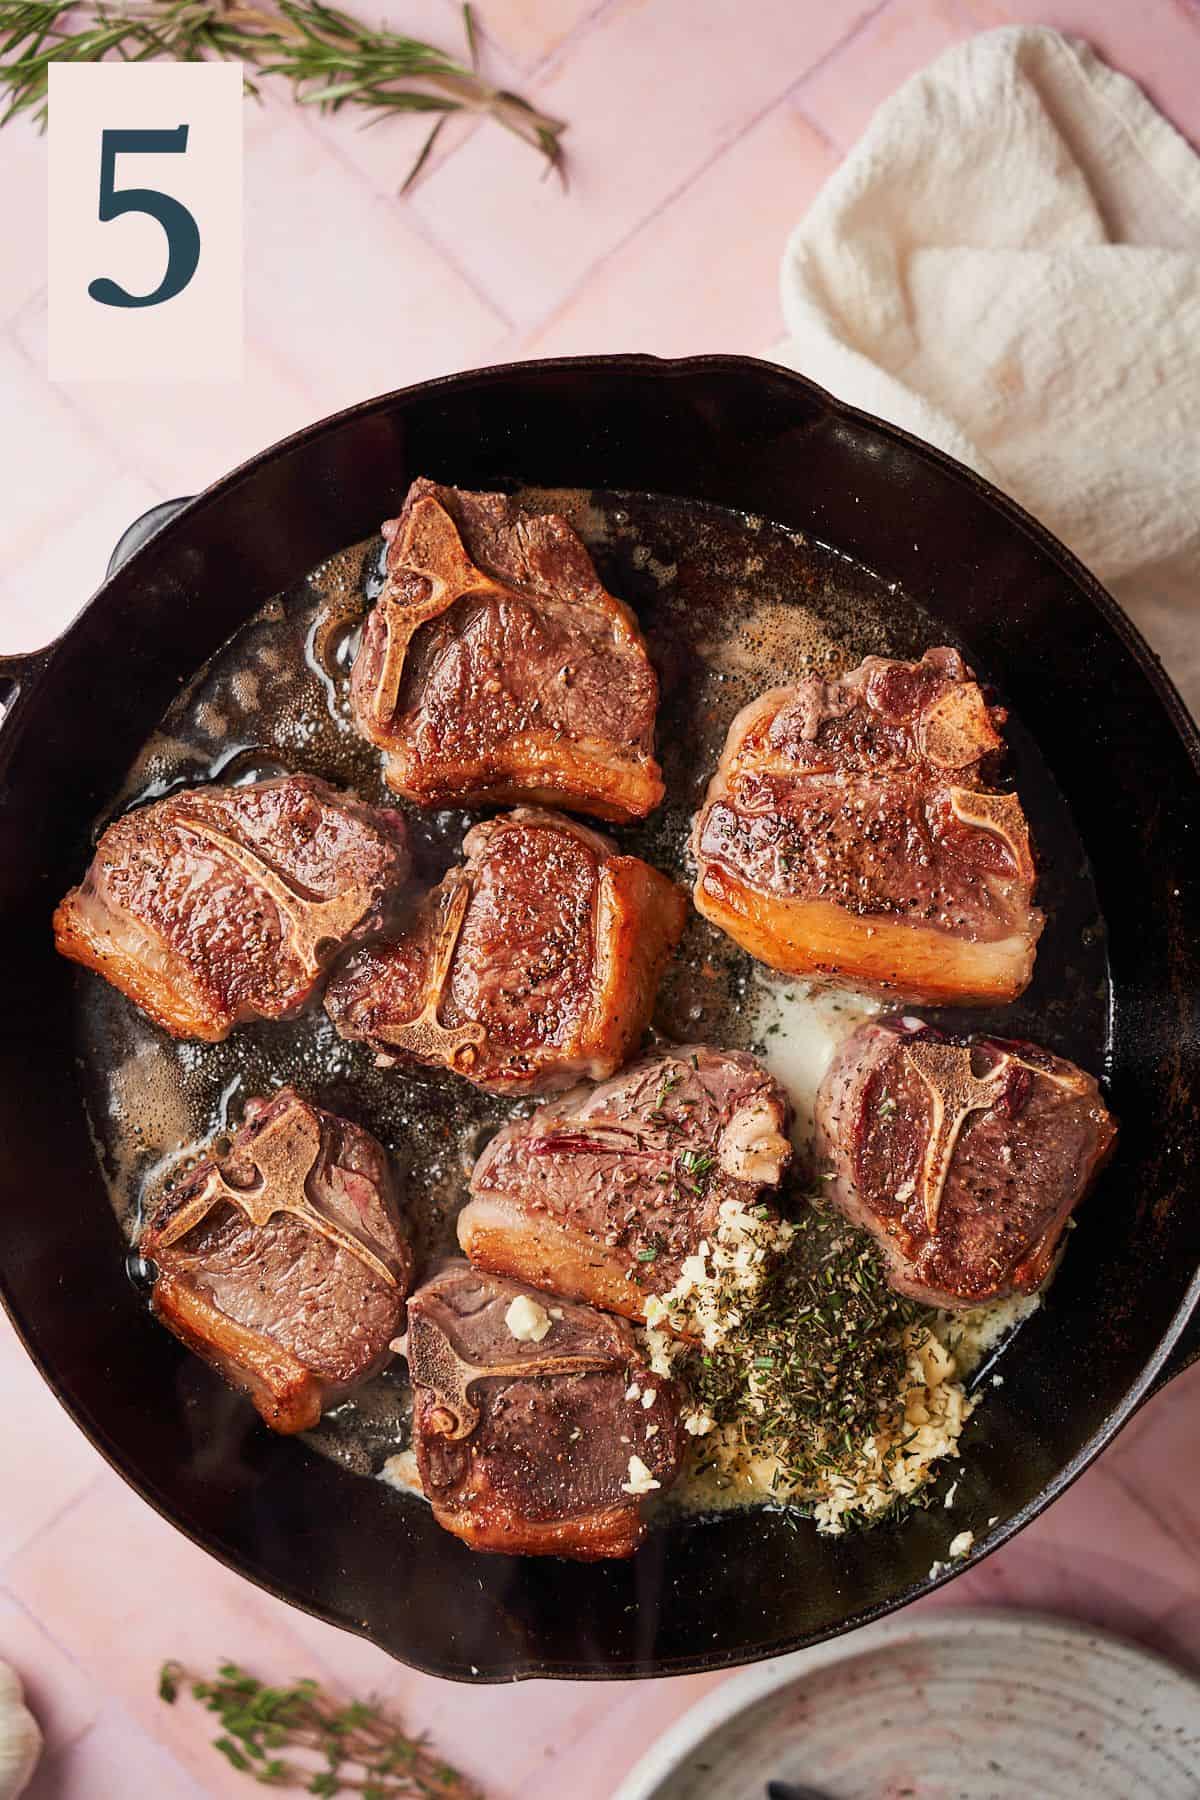 Cooked lamb chops in a large skillet with butter, herbs and garlic added.